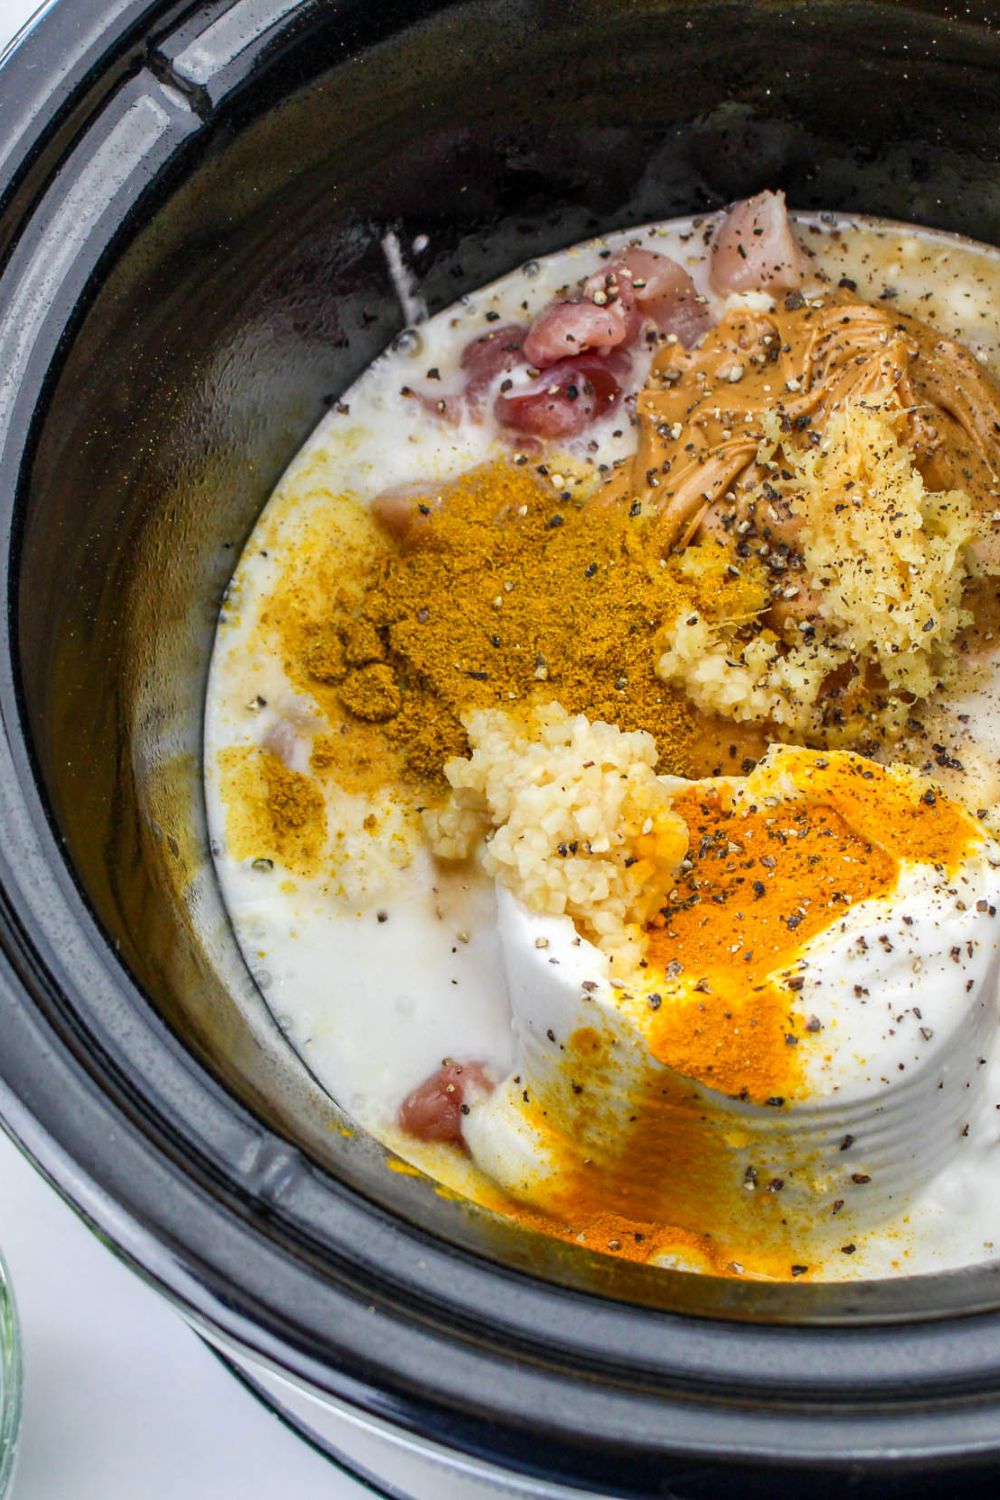 coconut milk, soy sauce, brown sugar, and spices all poured in a slow cooker on top of chicken